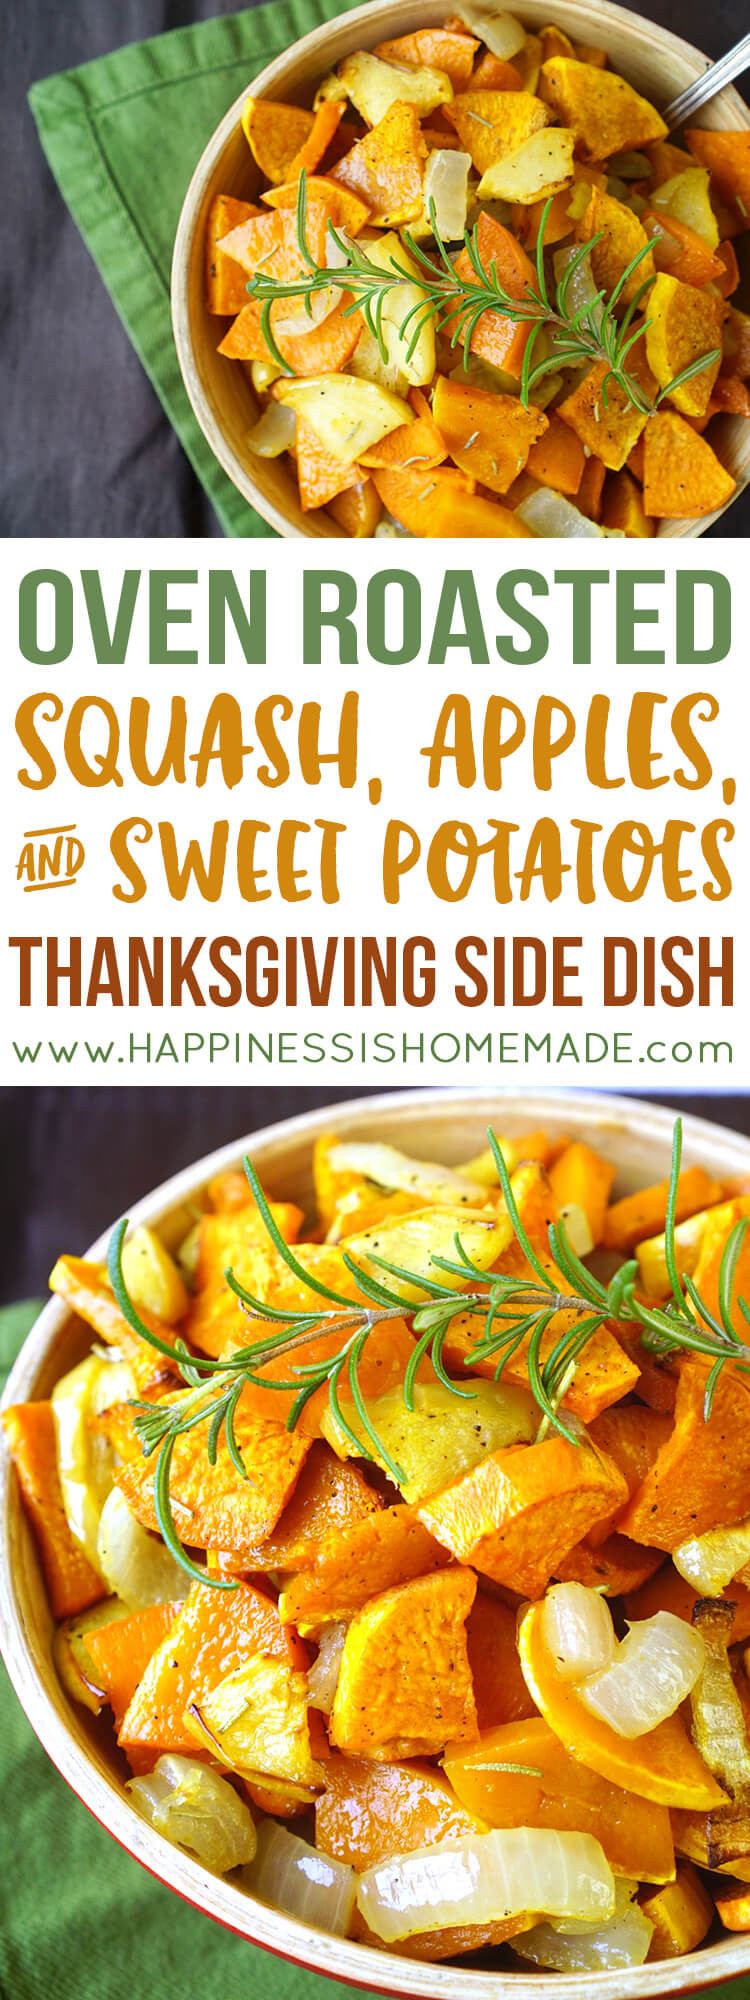 Sweet Potatoes Thanksgiving Side Dishes
 Roasted Sweet Potatoes Squash & Apples Happiness is